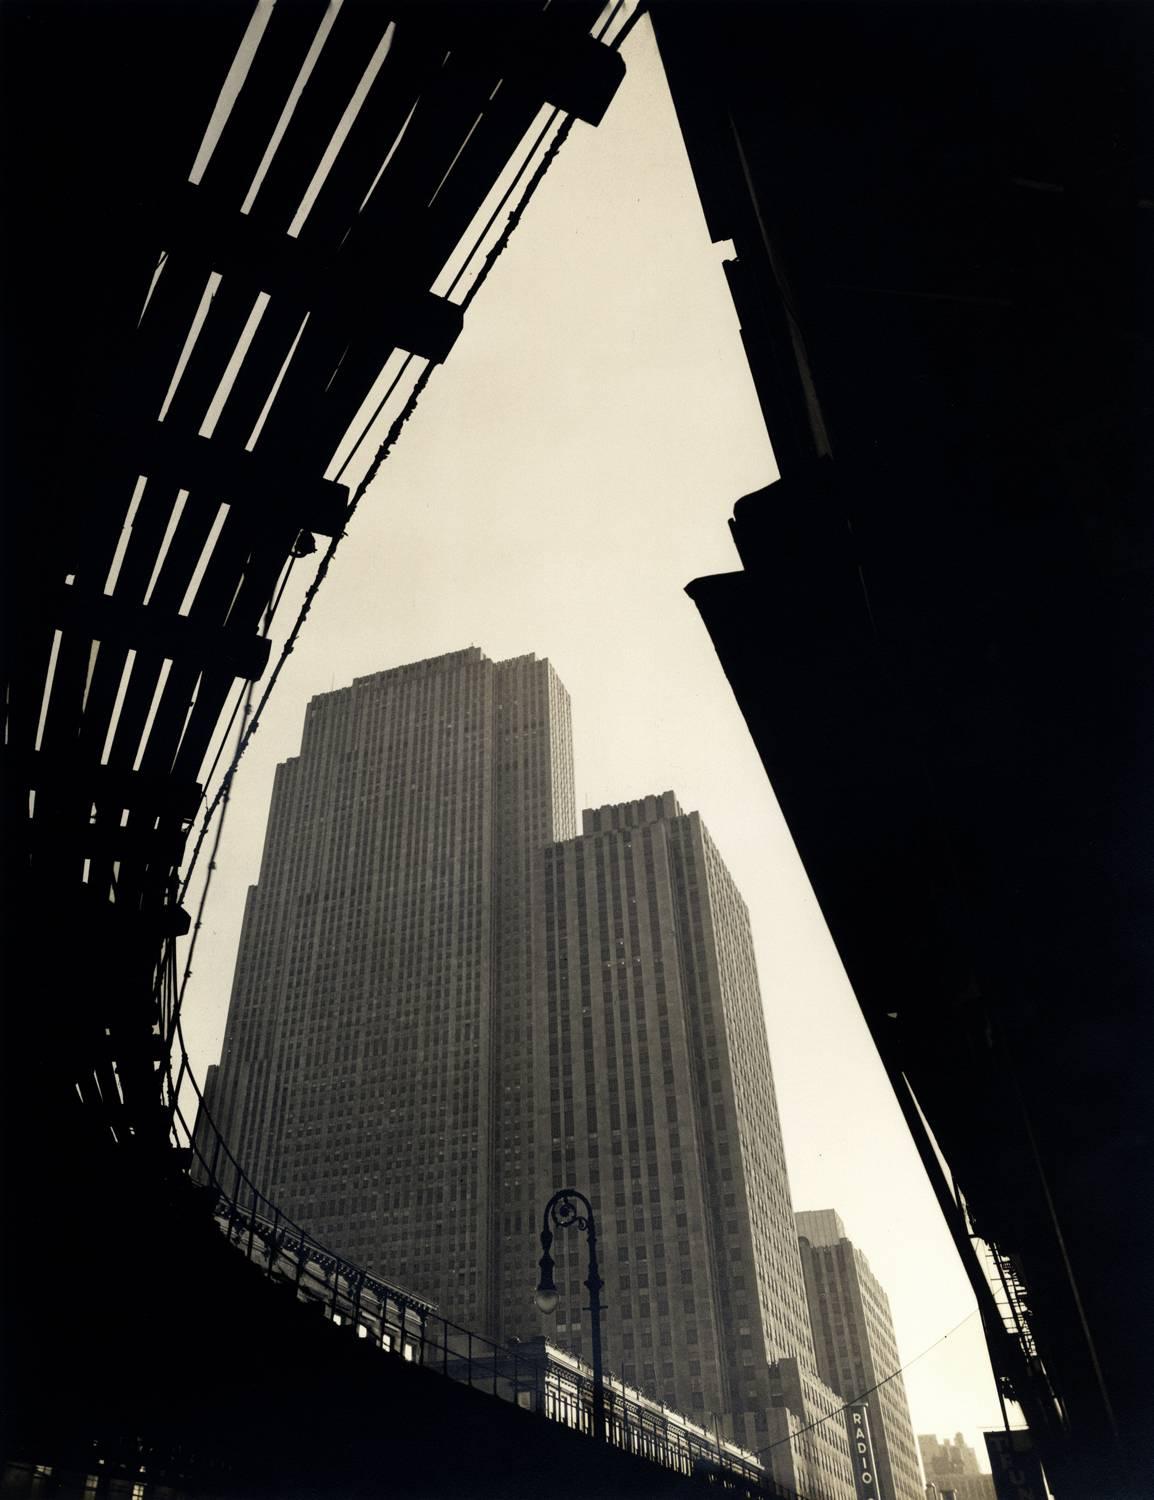 Wendell MacRae Black and White Photograph - Rockefeller Center, Seen from below the Sixth Avenue El